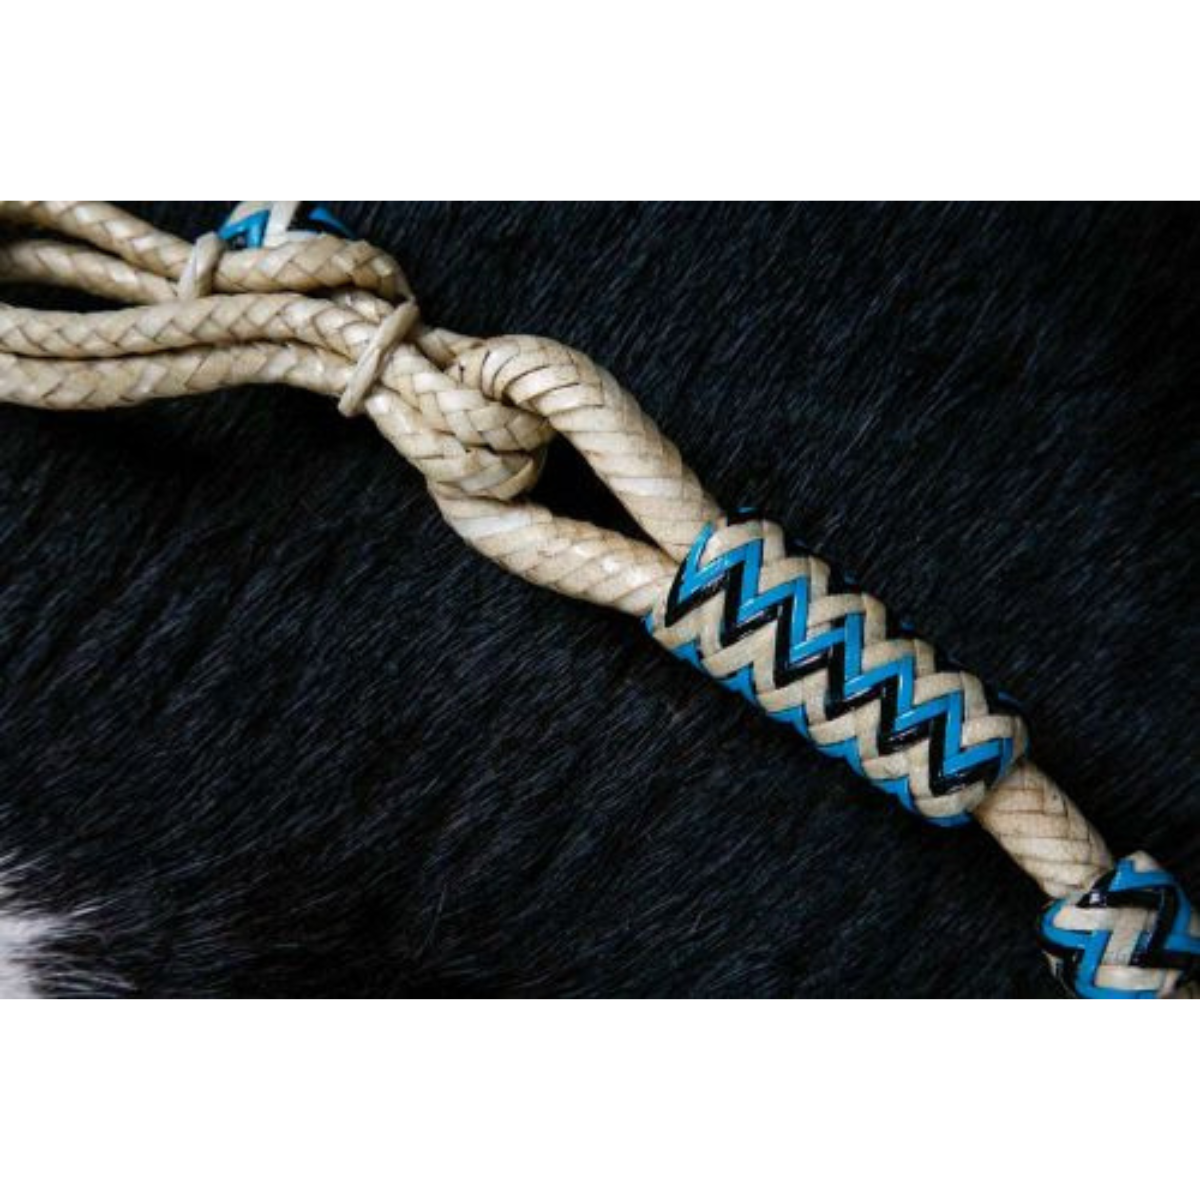 Showman ® Braided Natural Rawhide Romal Reins with Leather Popper and Blue Rawhide Beads. - Double T Saddles